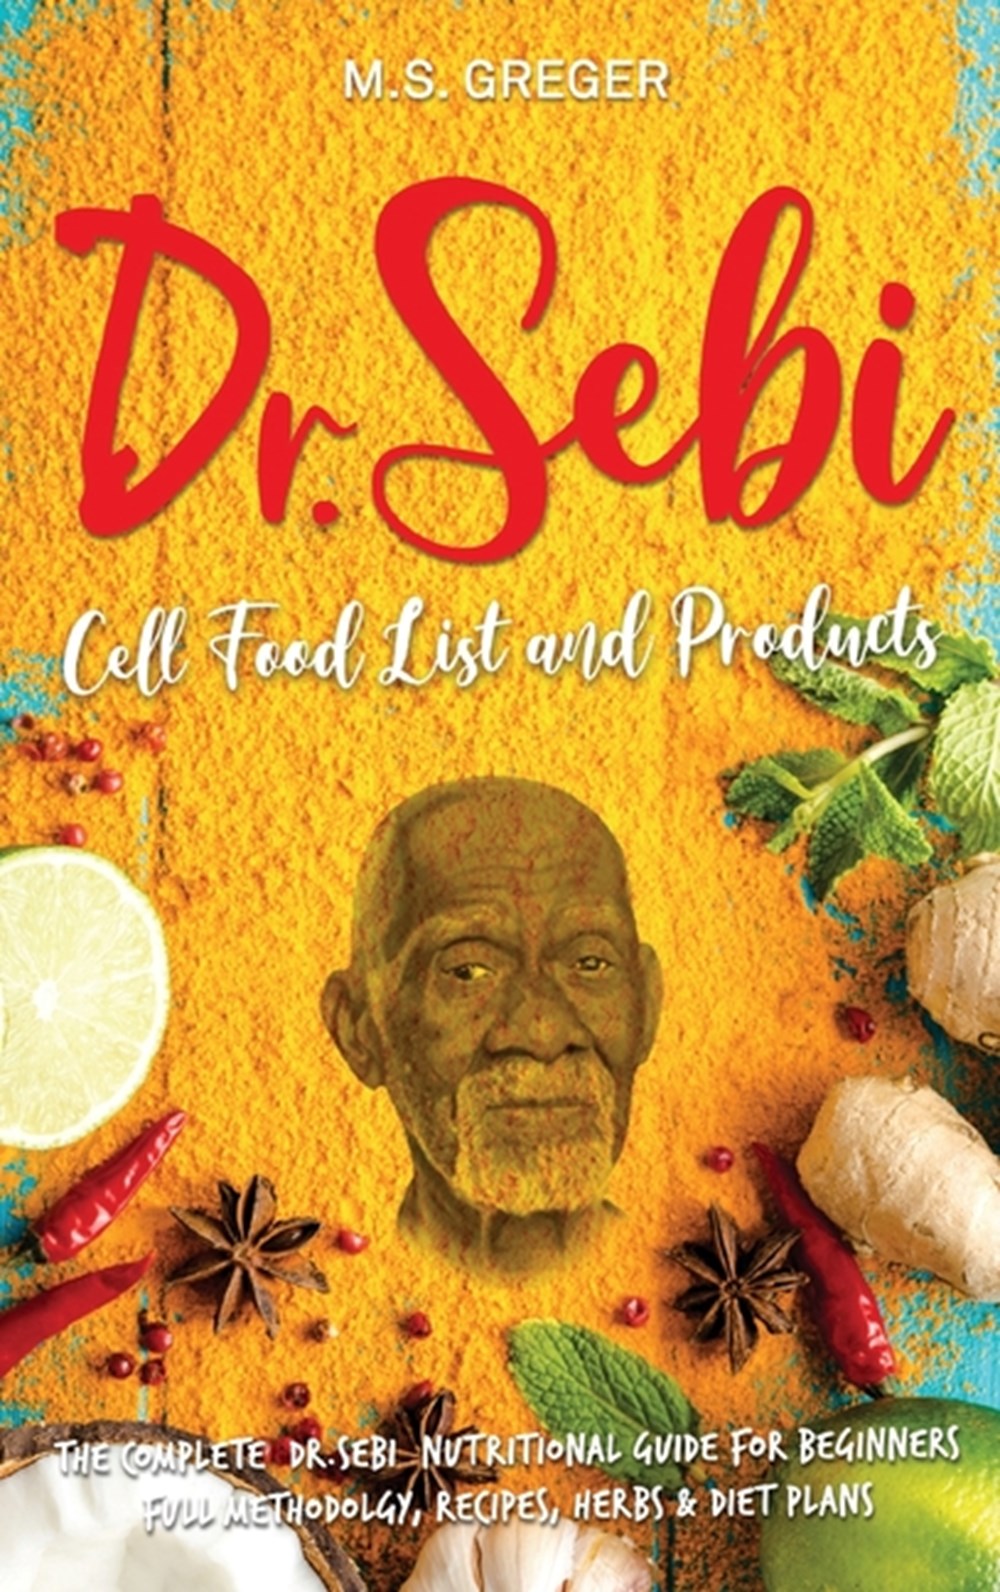 Buy Dr Sebi Cell Food List And Products The Complete Dr Sebi Nutritional Guide For Beginners With Full Methodology Recipes Herbs And Diet Plans By M S Greger From Porchlight Book Company